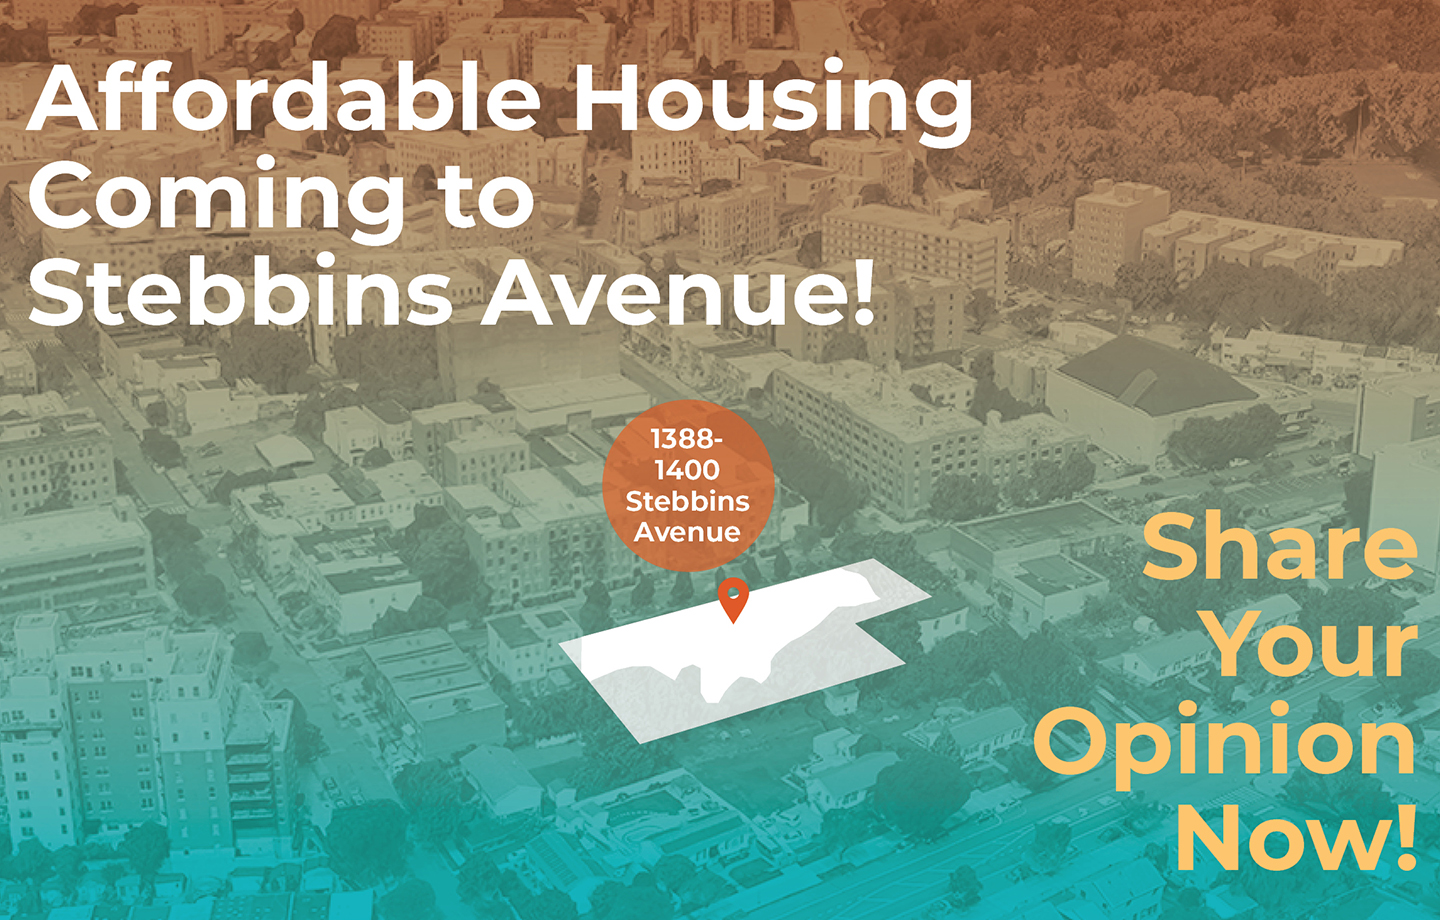 Affordable housing coming to Stebbins Avenue
                                           